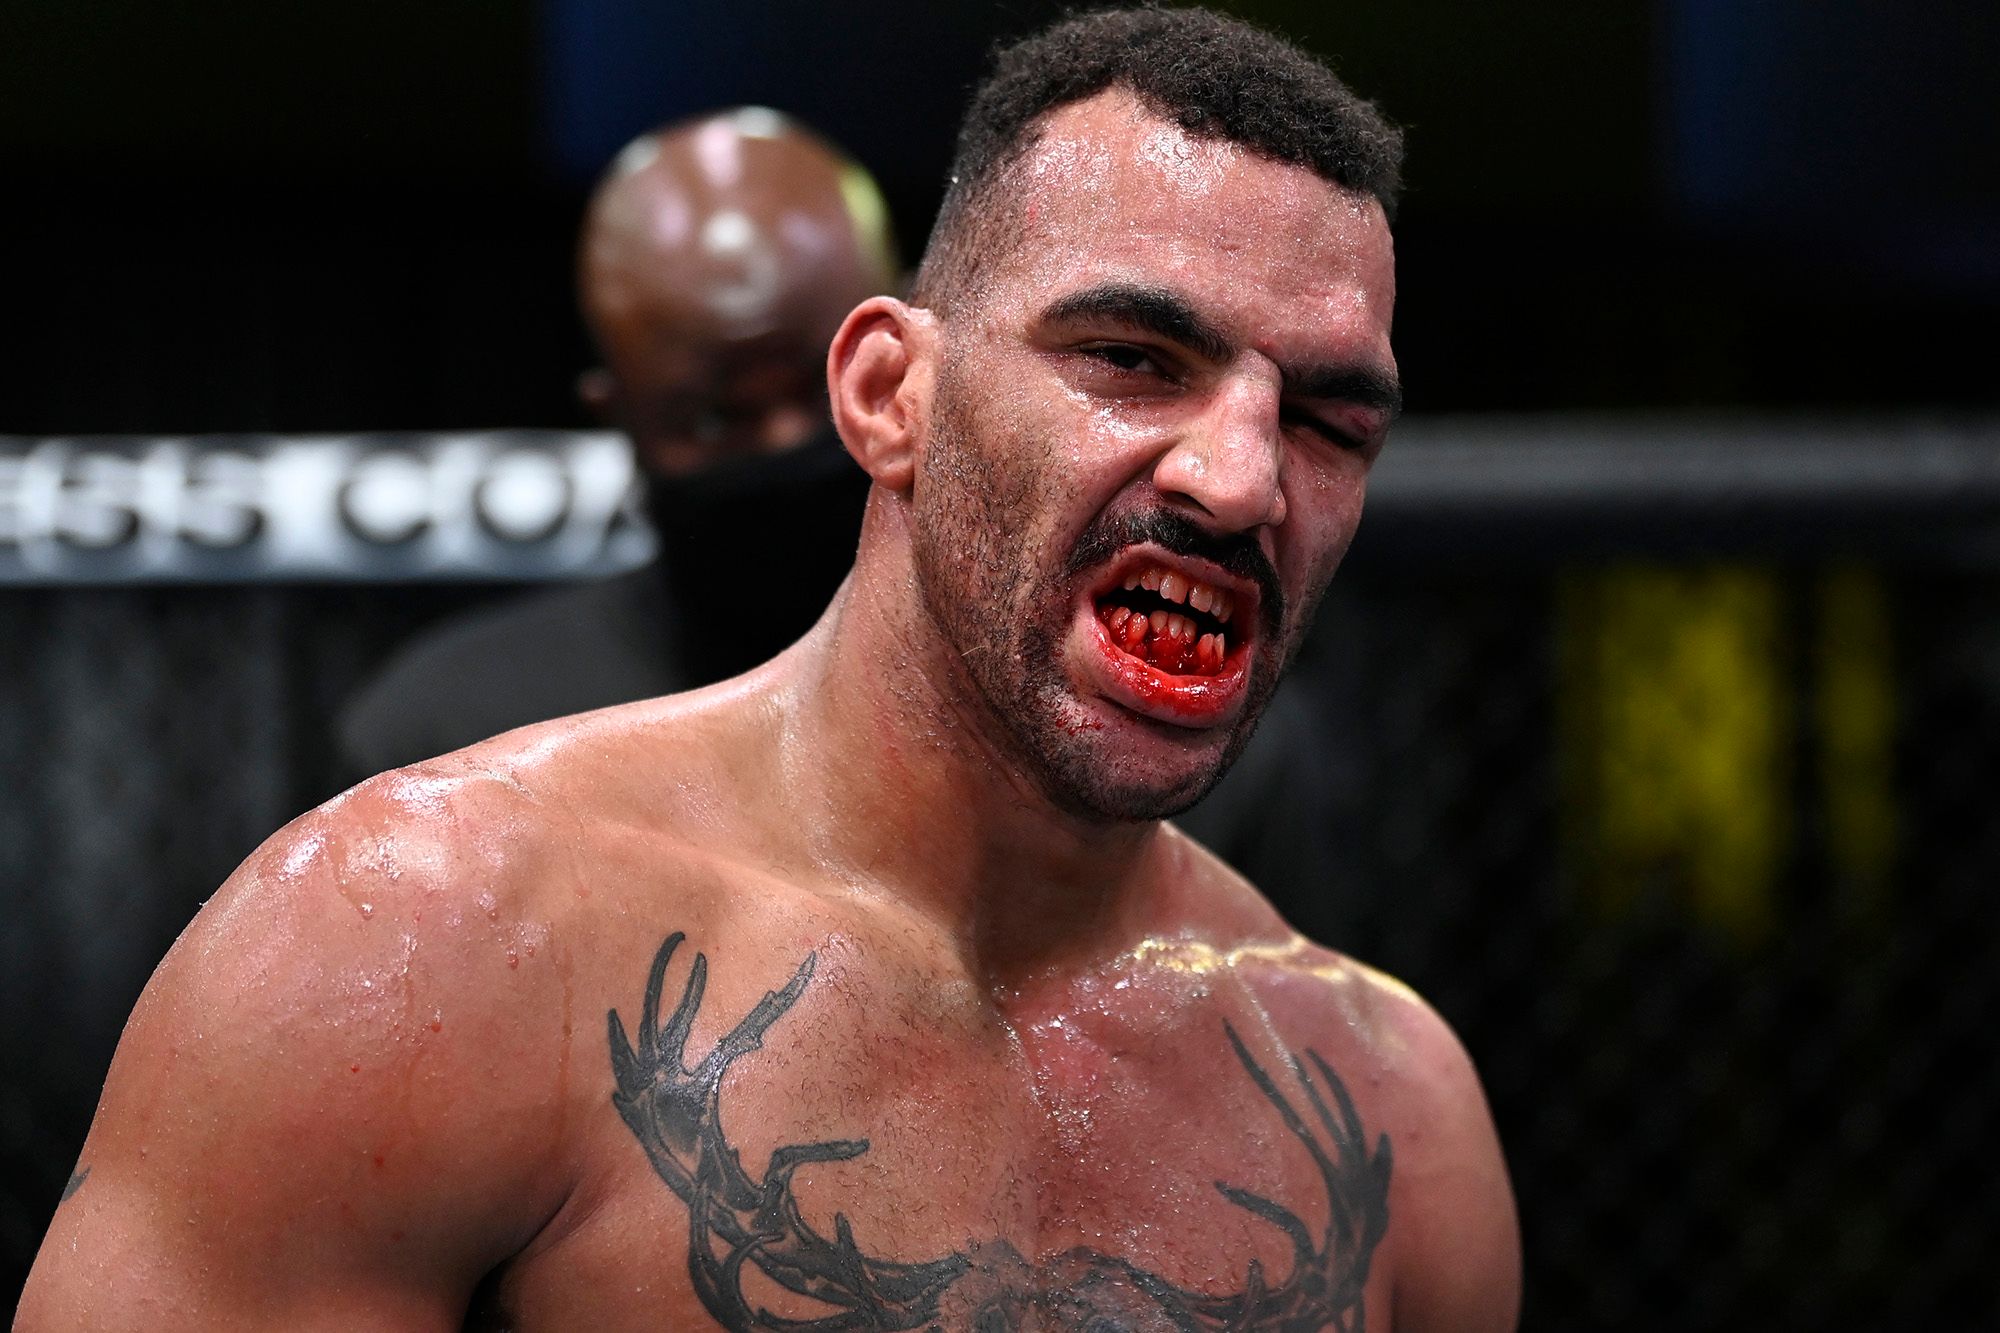 Devin Clark Teeth after fight with Ion Cutelaba Star’s Smashed Teeth Graphic image! UFC